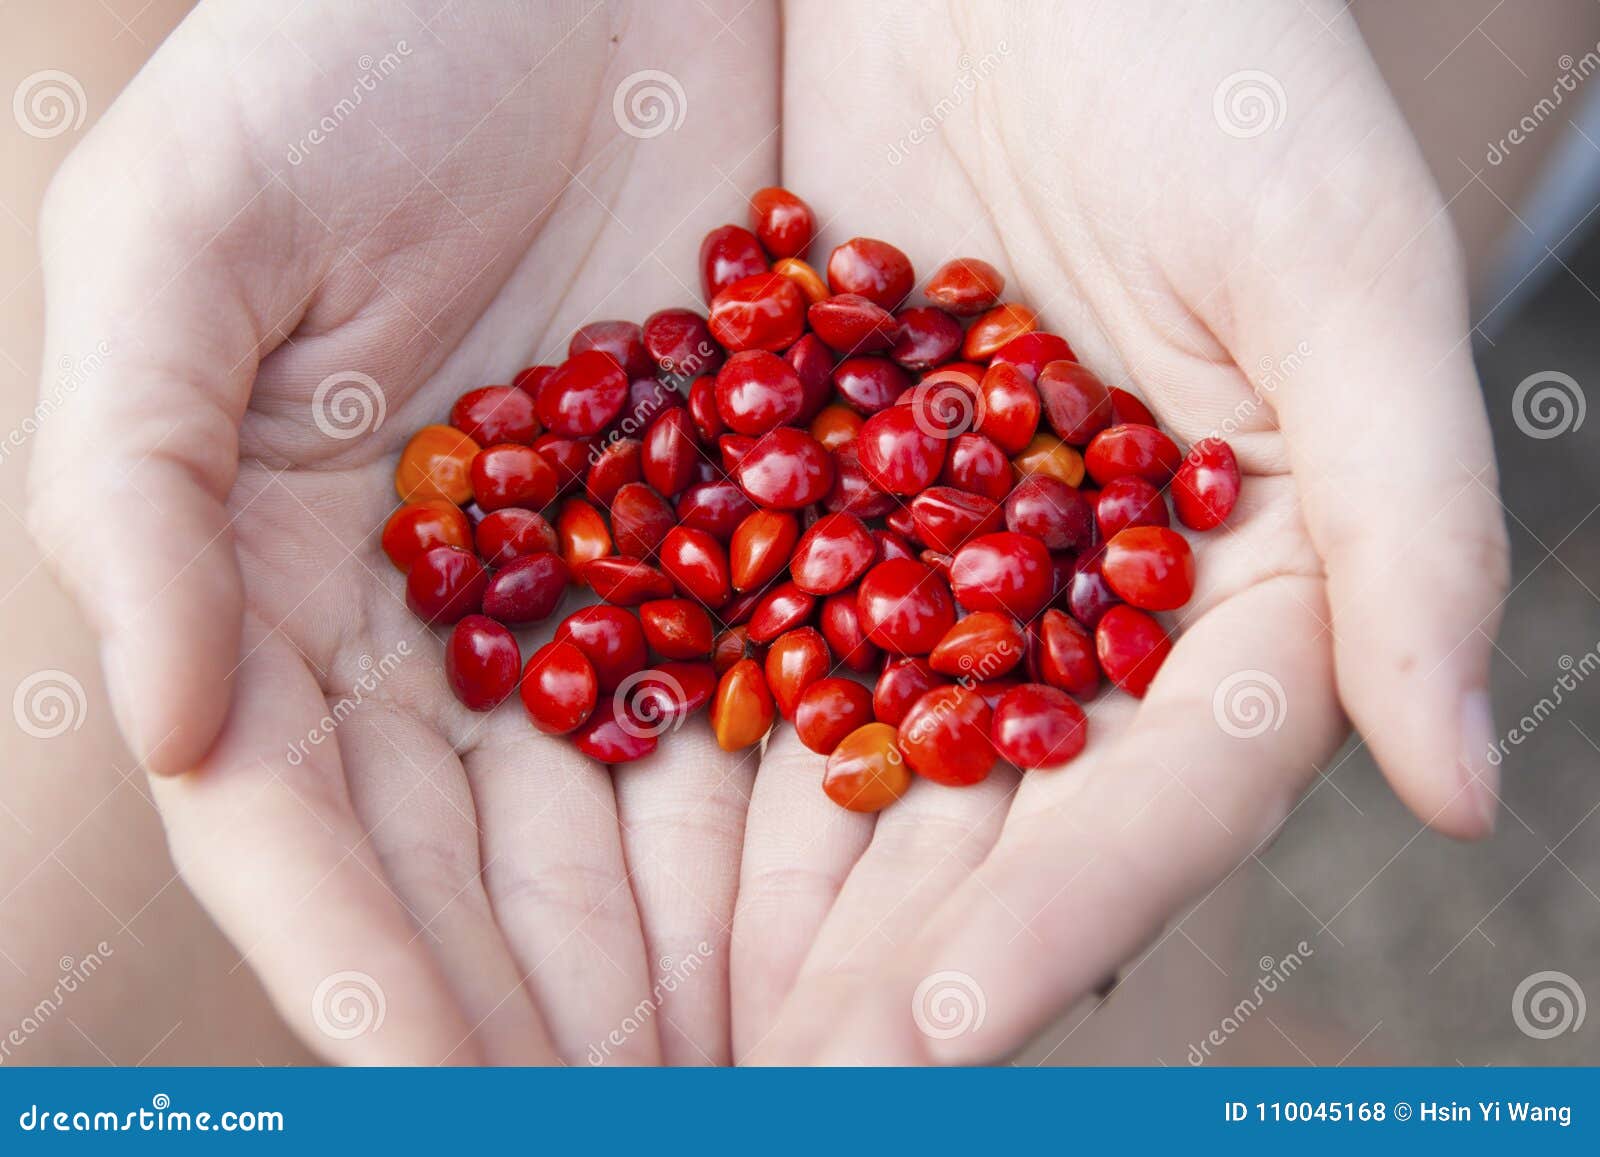 the acacia beans hold in the hands